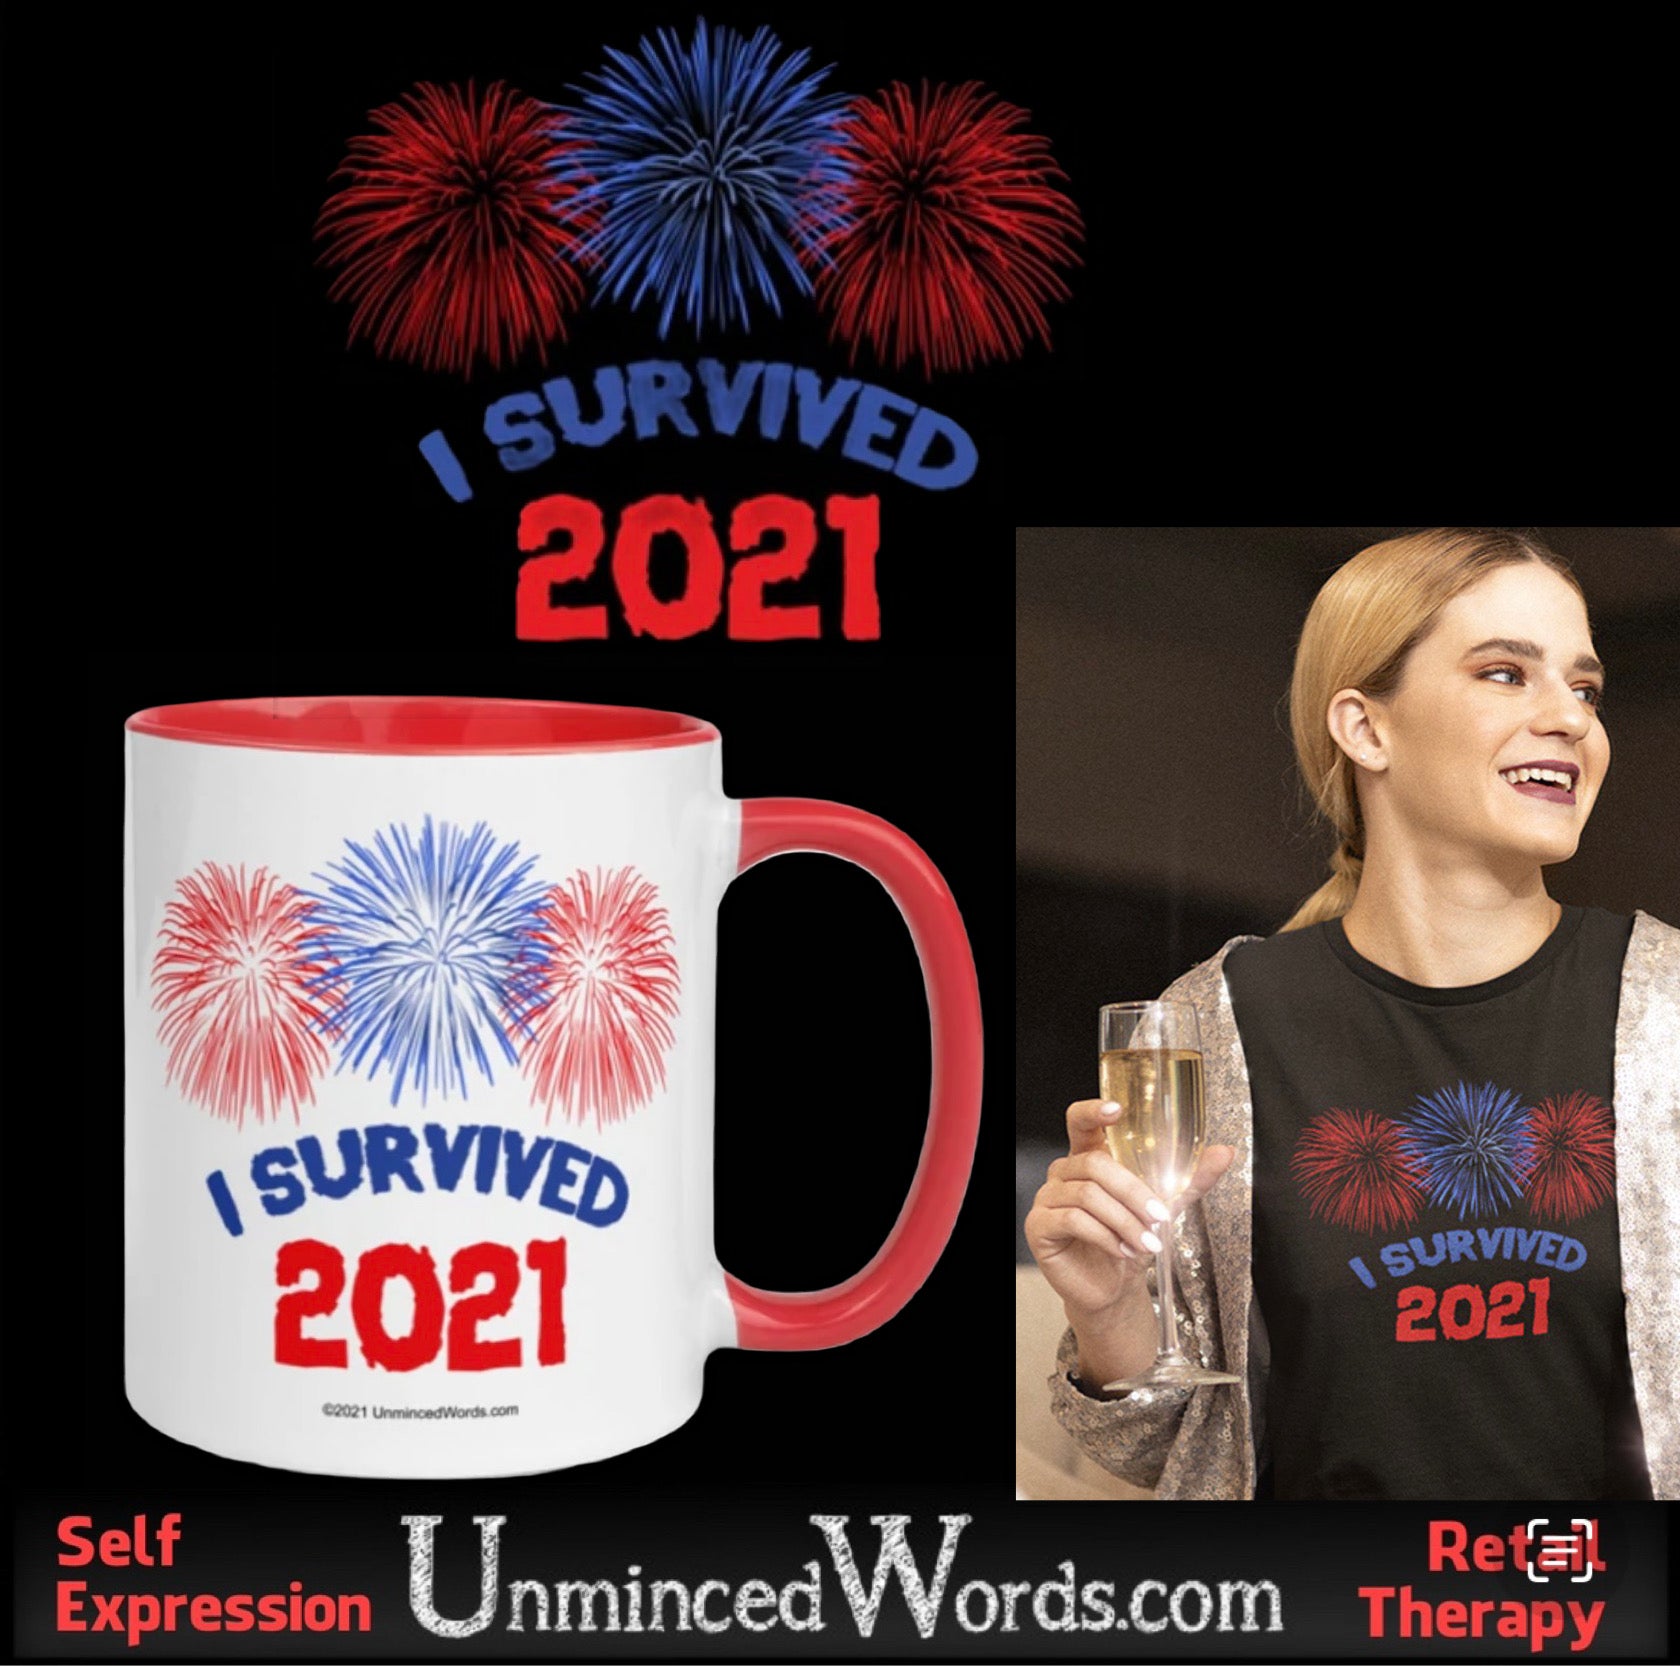 You Survived 2021! Time to celebrate.